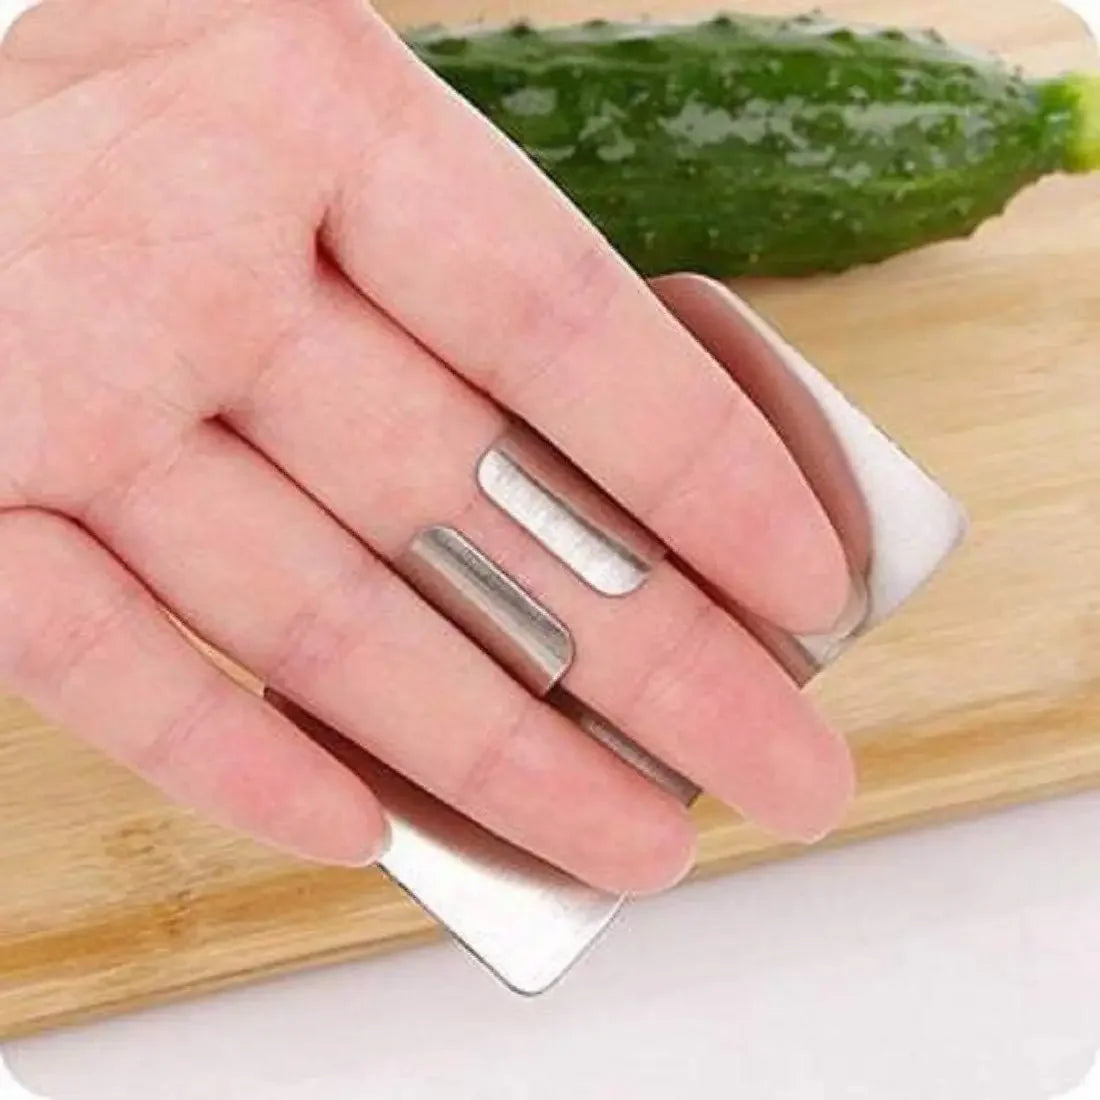 Stainless Steel Finger Guard Cutting Shiel Adjustable Vegetable Cutting Thumb Guard Finger Protector Tools Kitchen Gadget